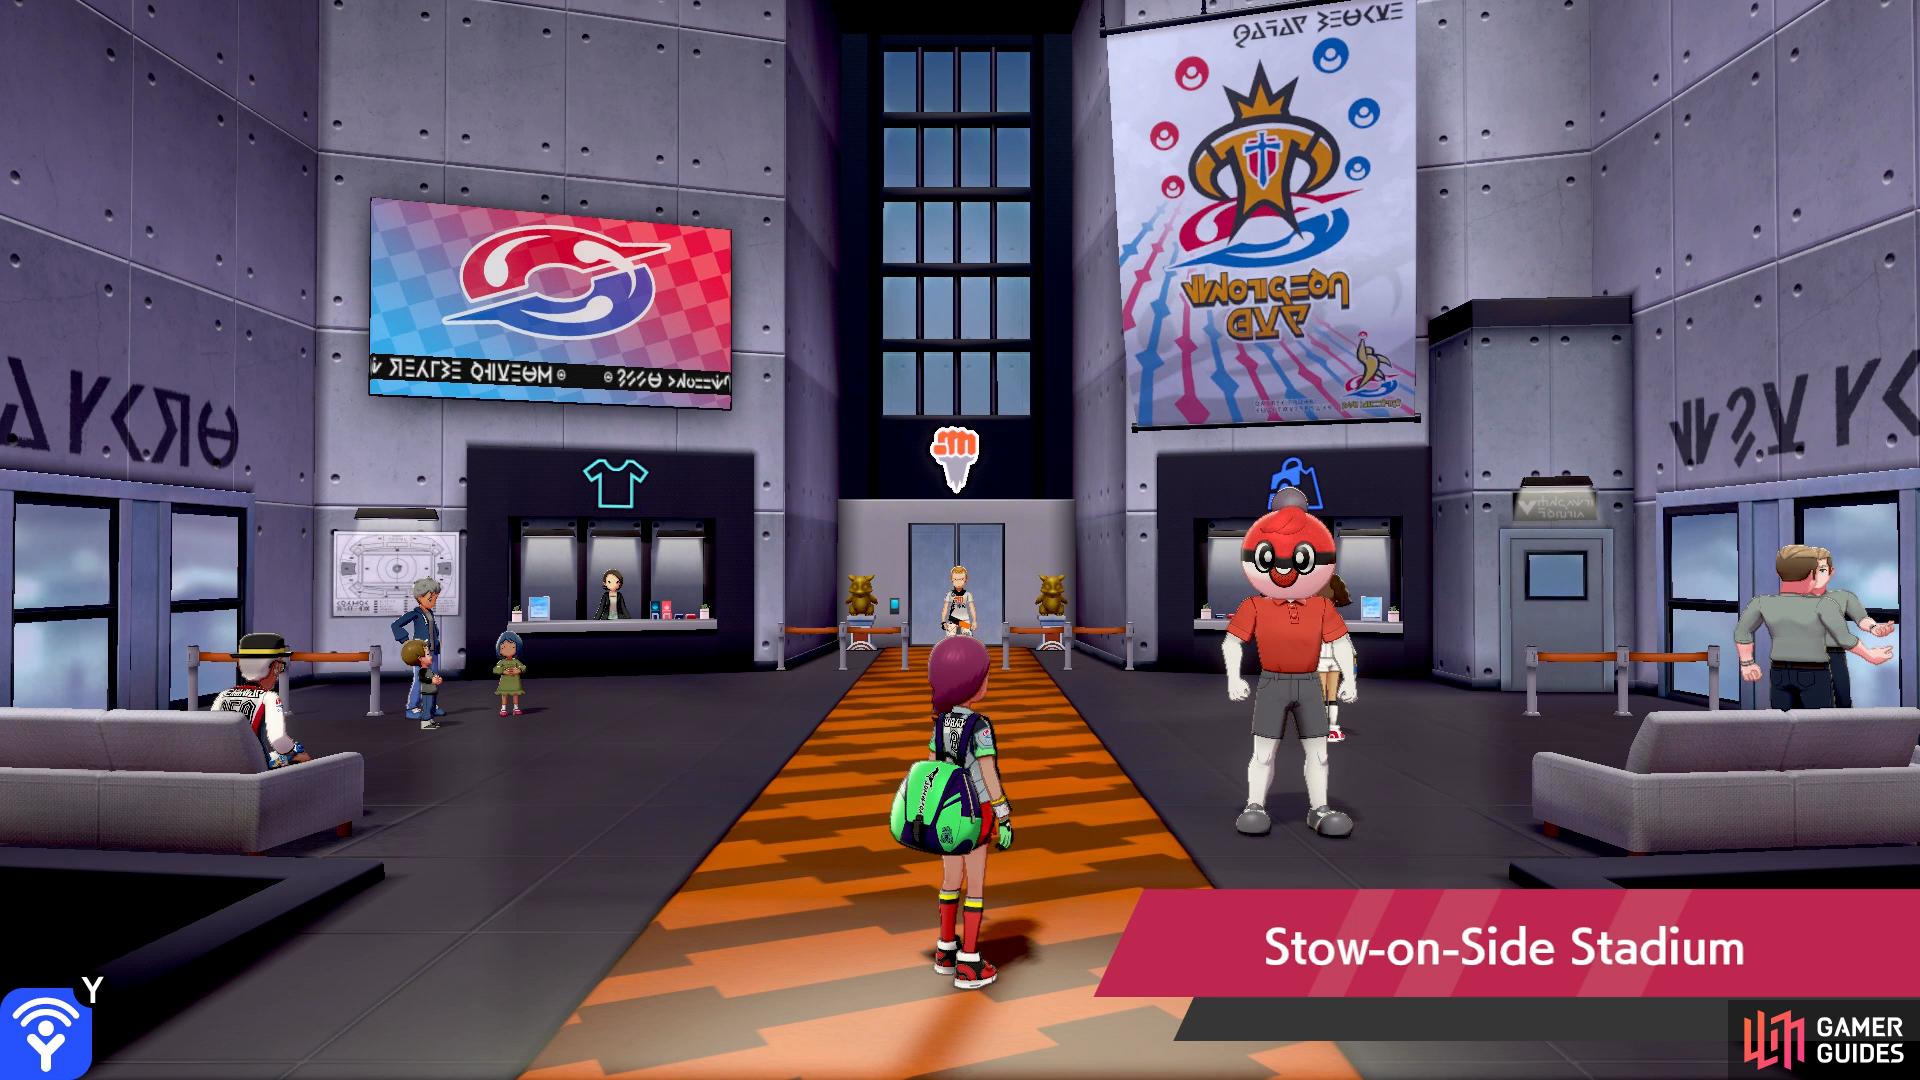 The stadium–and the Gym mission–are basically the same in both versions, but with a different coat of paint.